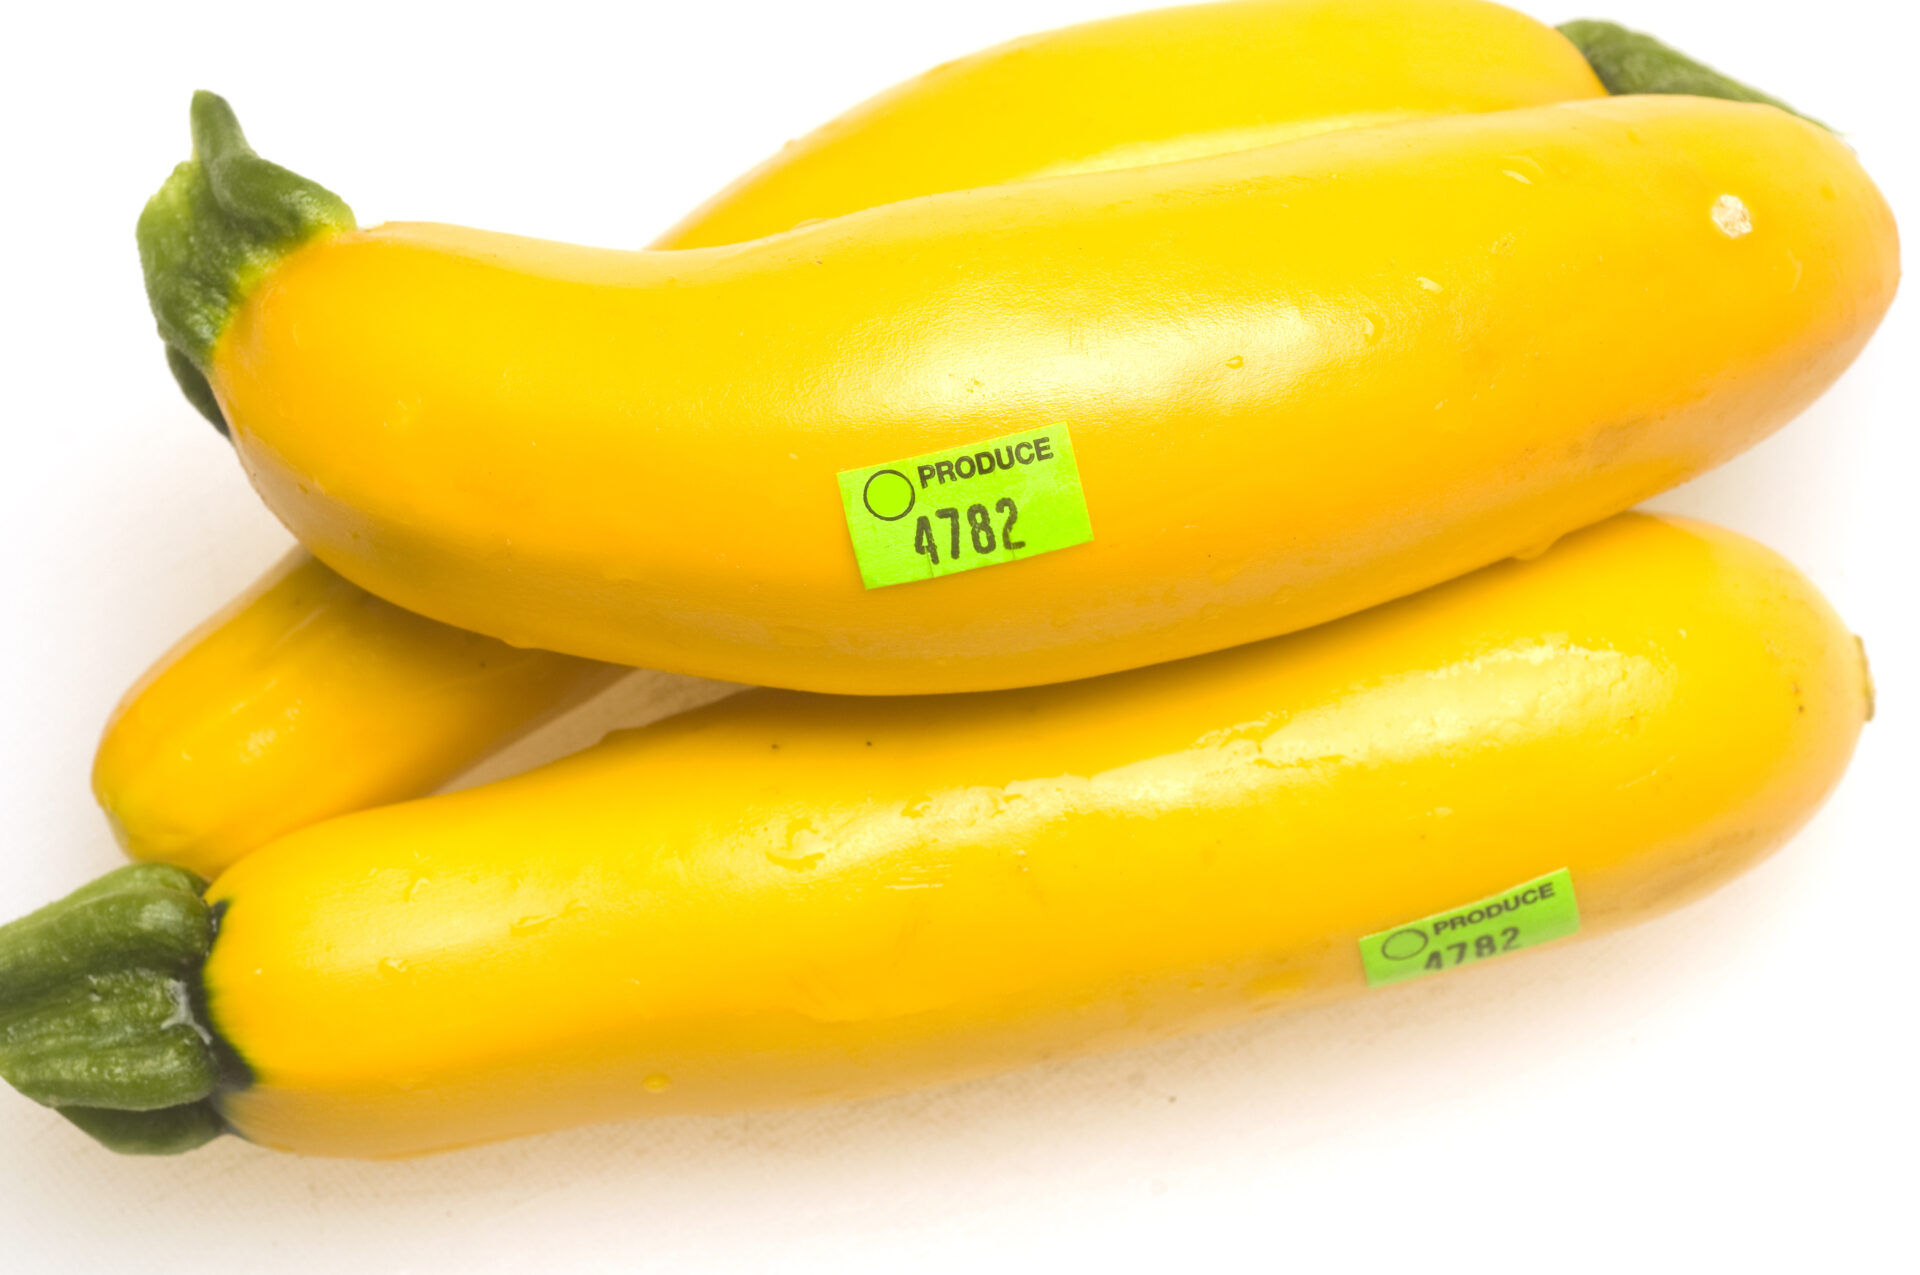 Three yellow zucchini with produce stickers. Avoid disposing in kitchen drain. MidCity Plumbers